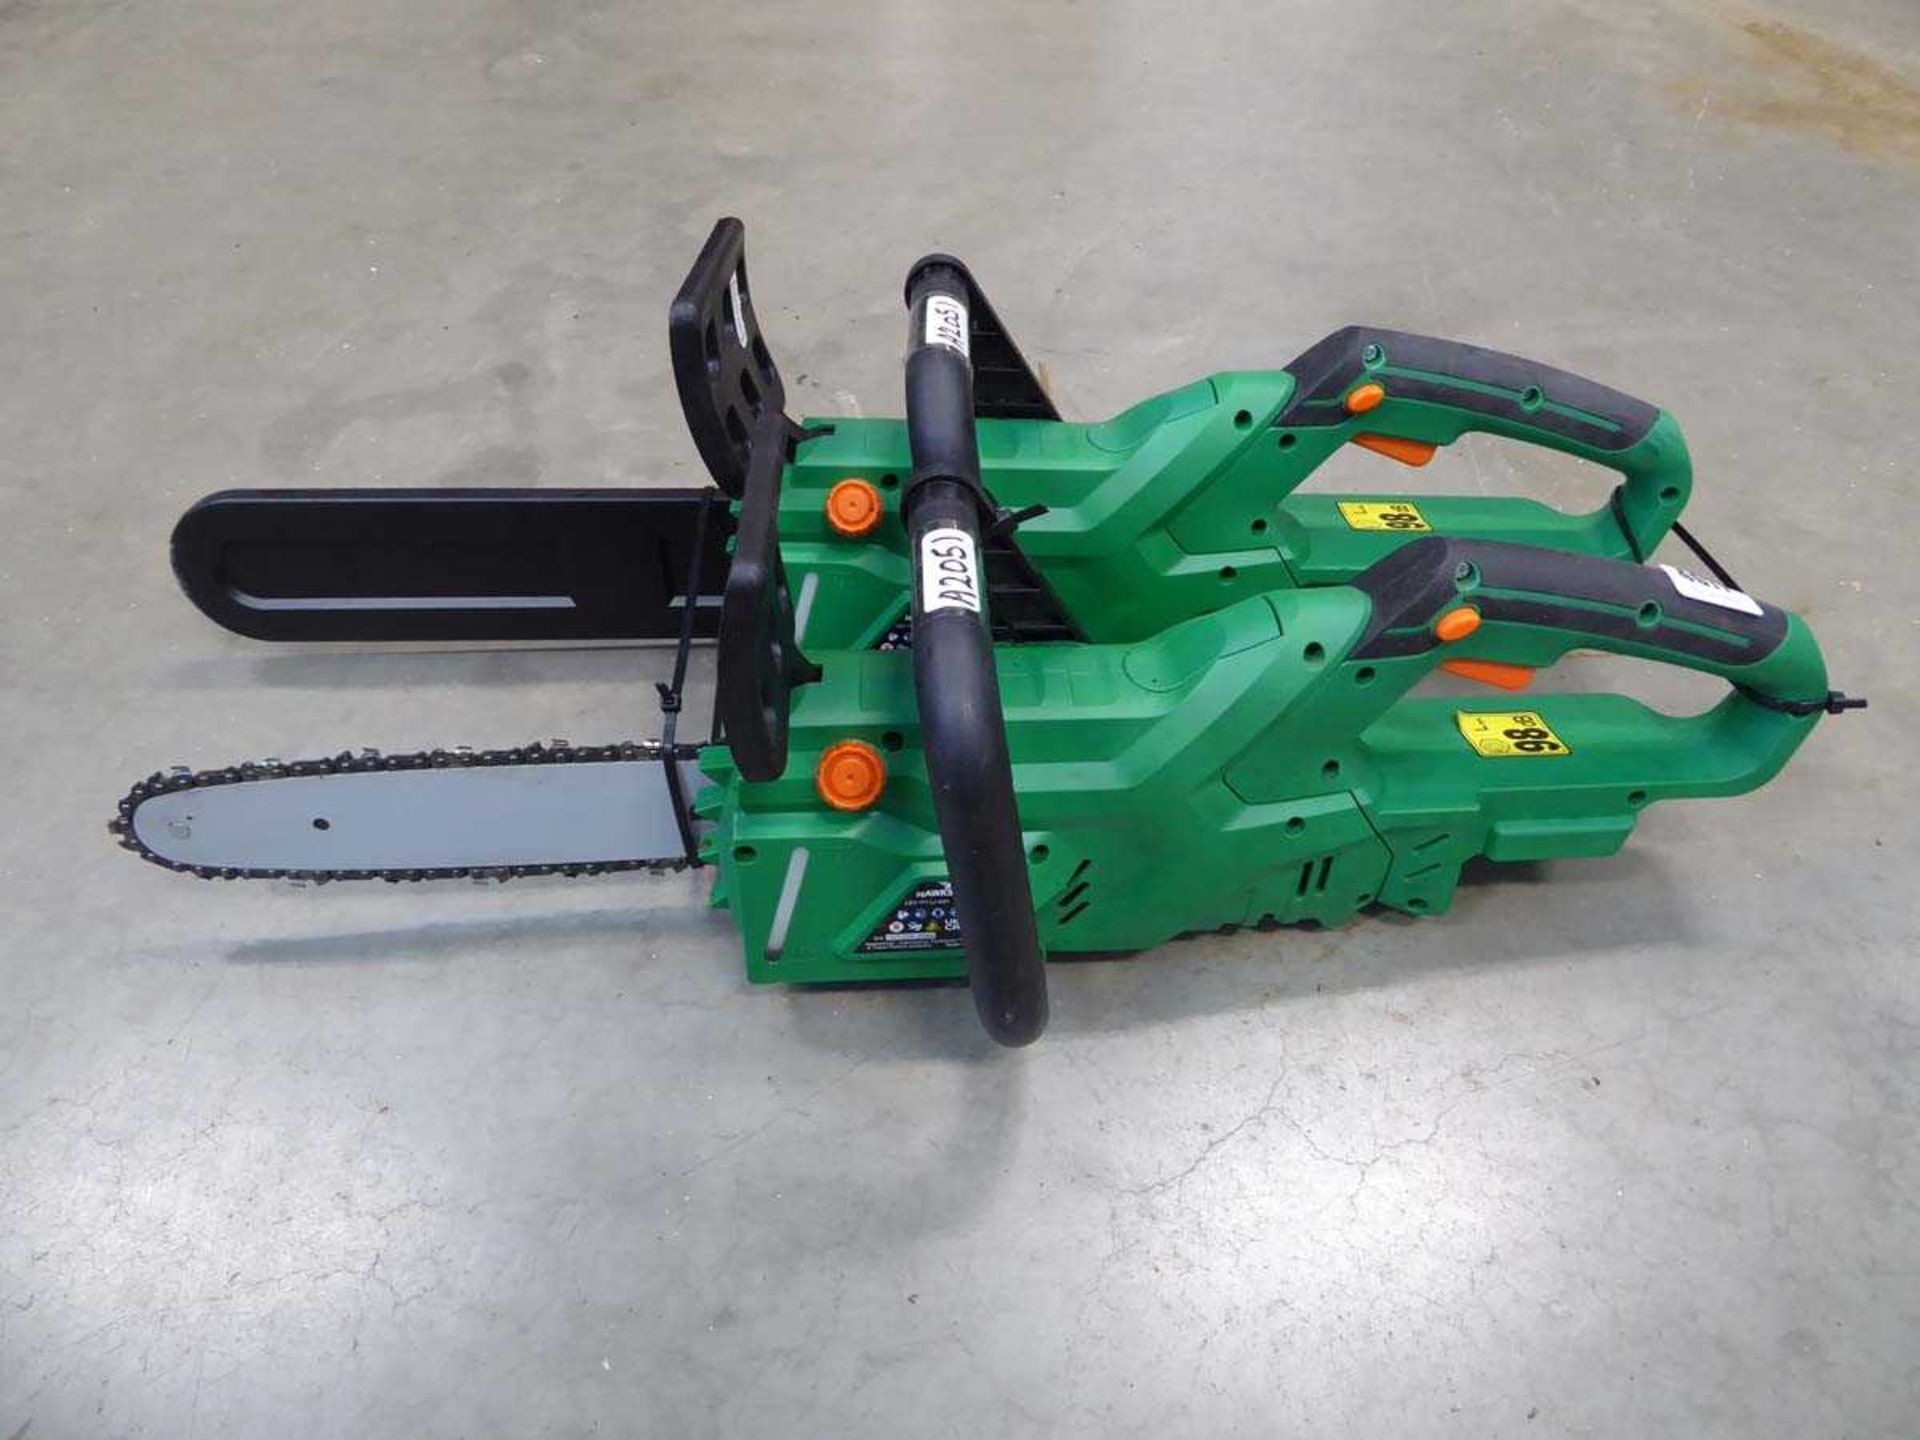 Two Hawskmoor battery powered chainsaw, no battery or charger